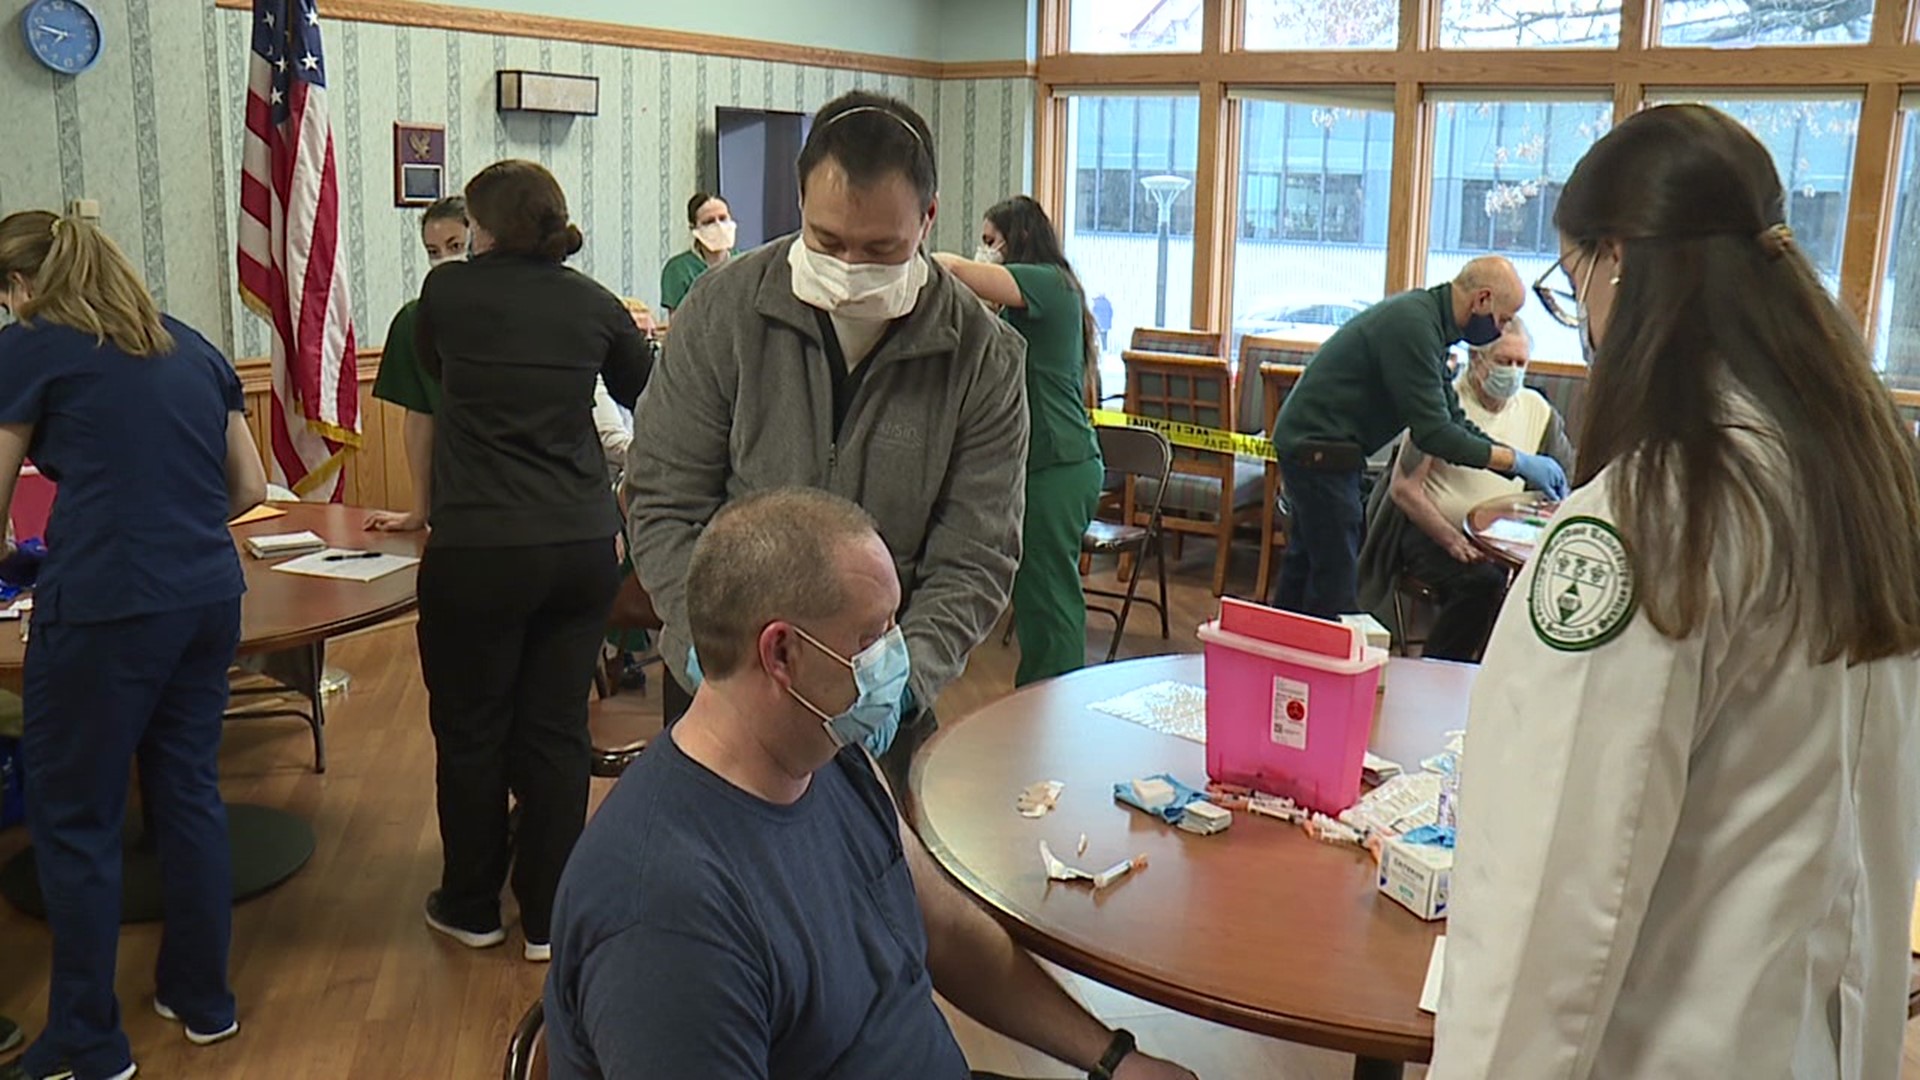 Friends of the Poor held the clinic in place of its annual day of service for Martin Luther King Jr. Day